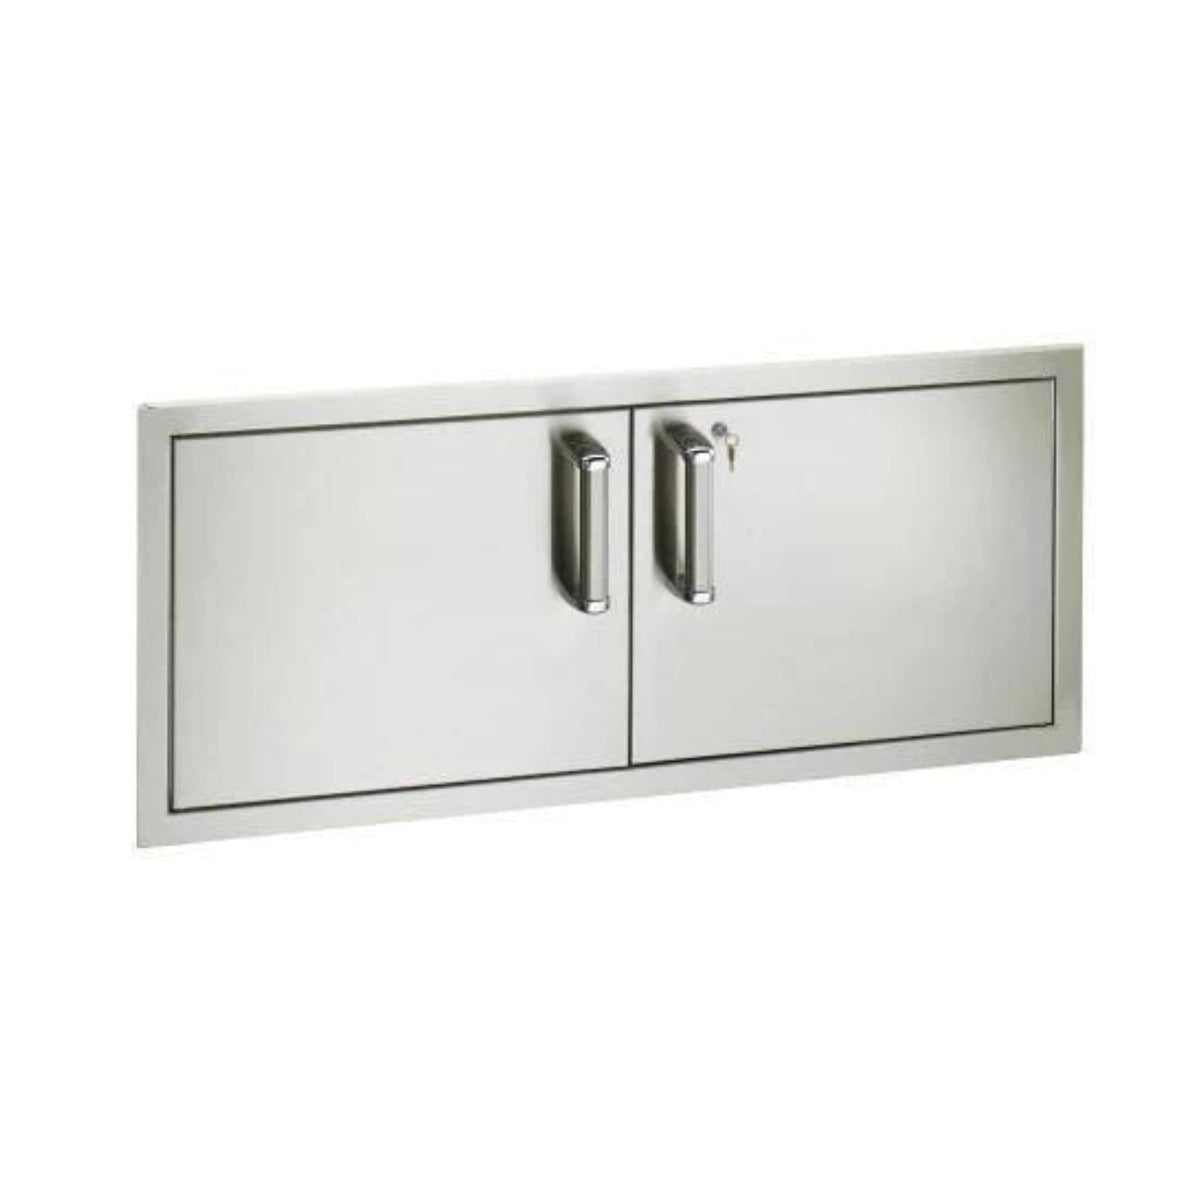 Fire Magic Double Access Doors (Reduced Height) Locking Model 53934KSC